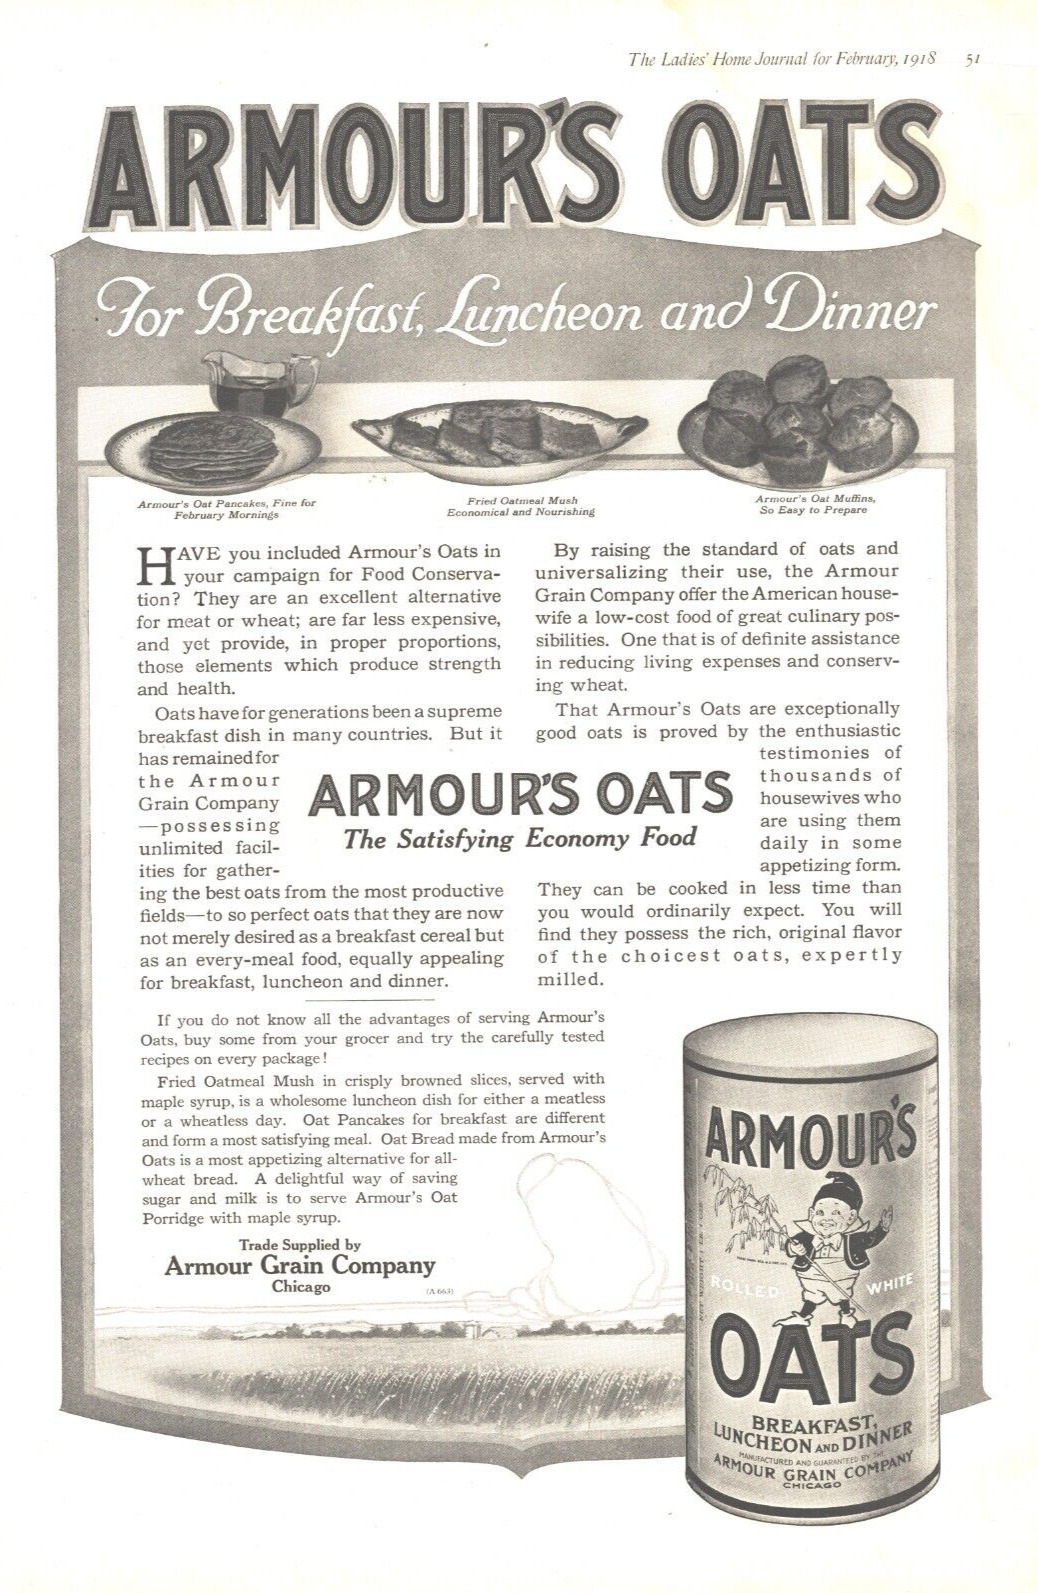 1918 Armour Oats Antique Ad WW1 Era Satisfying Economy Food War Conservation